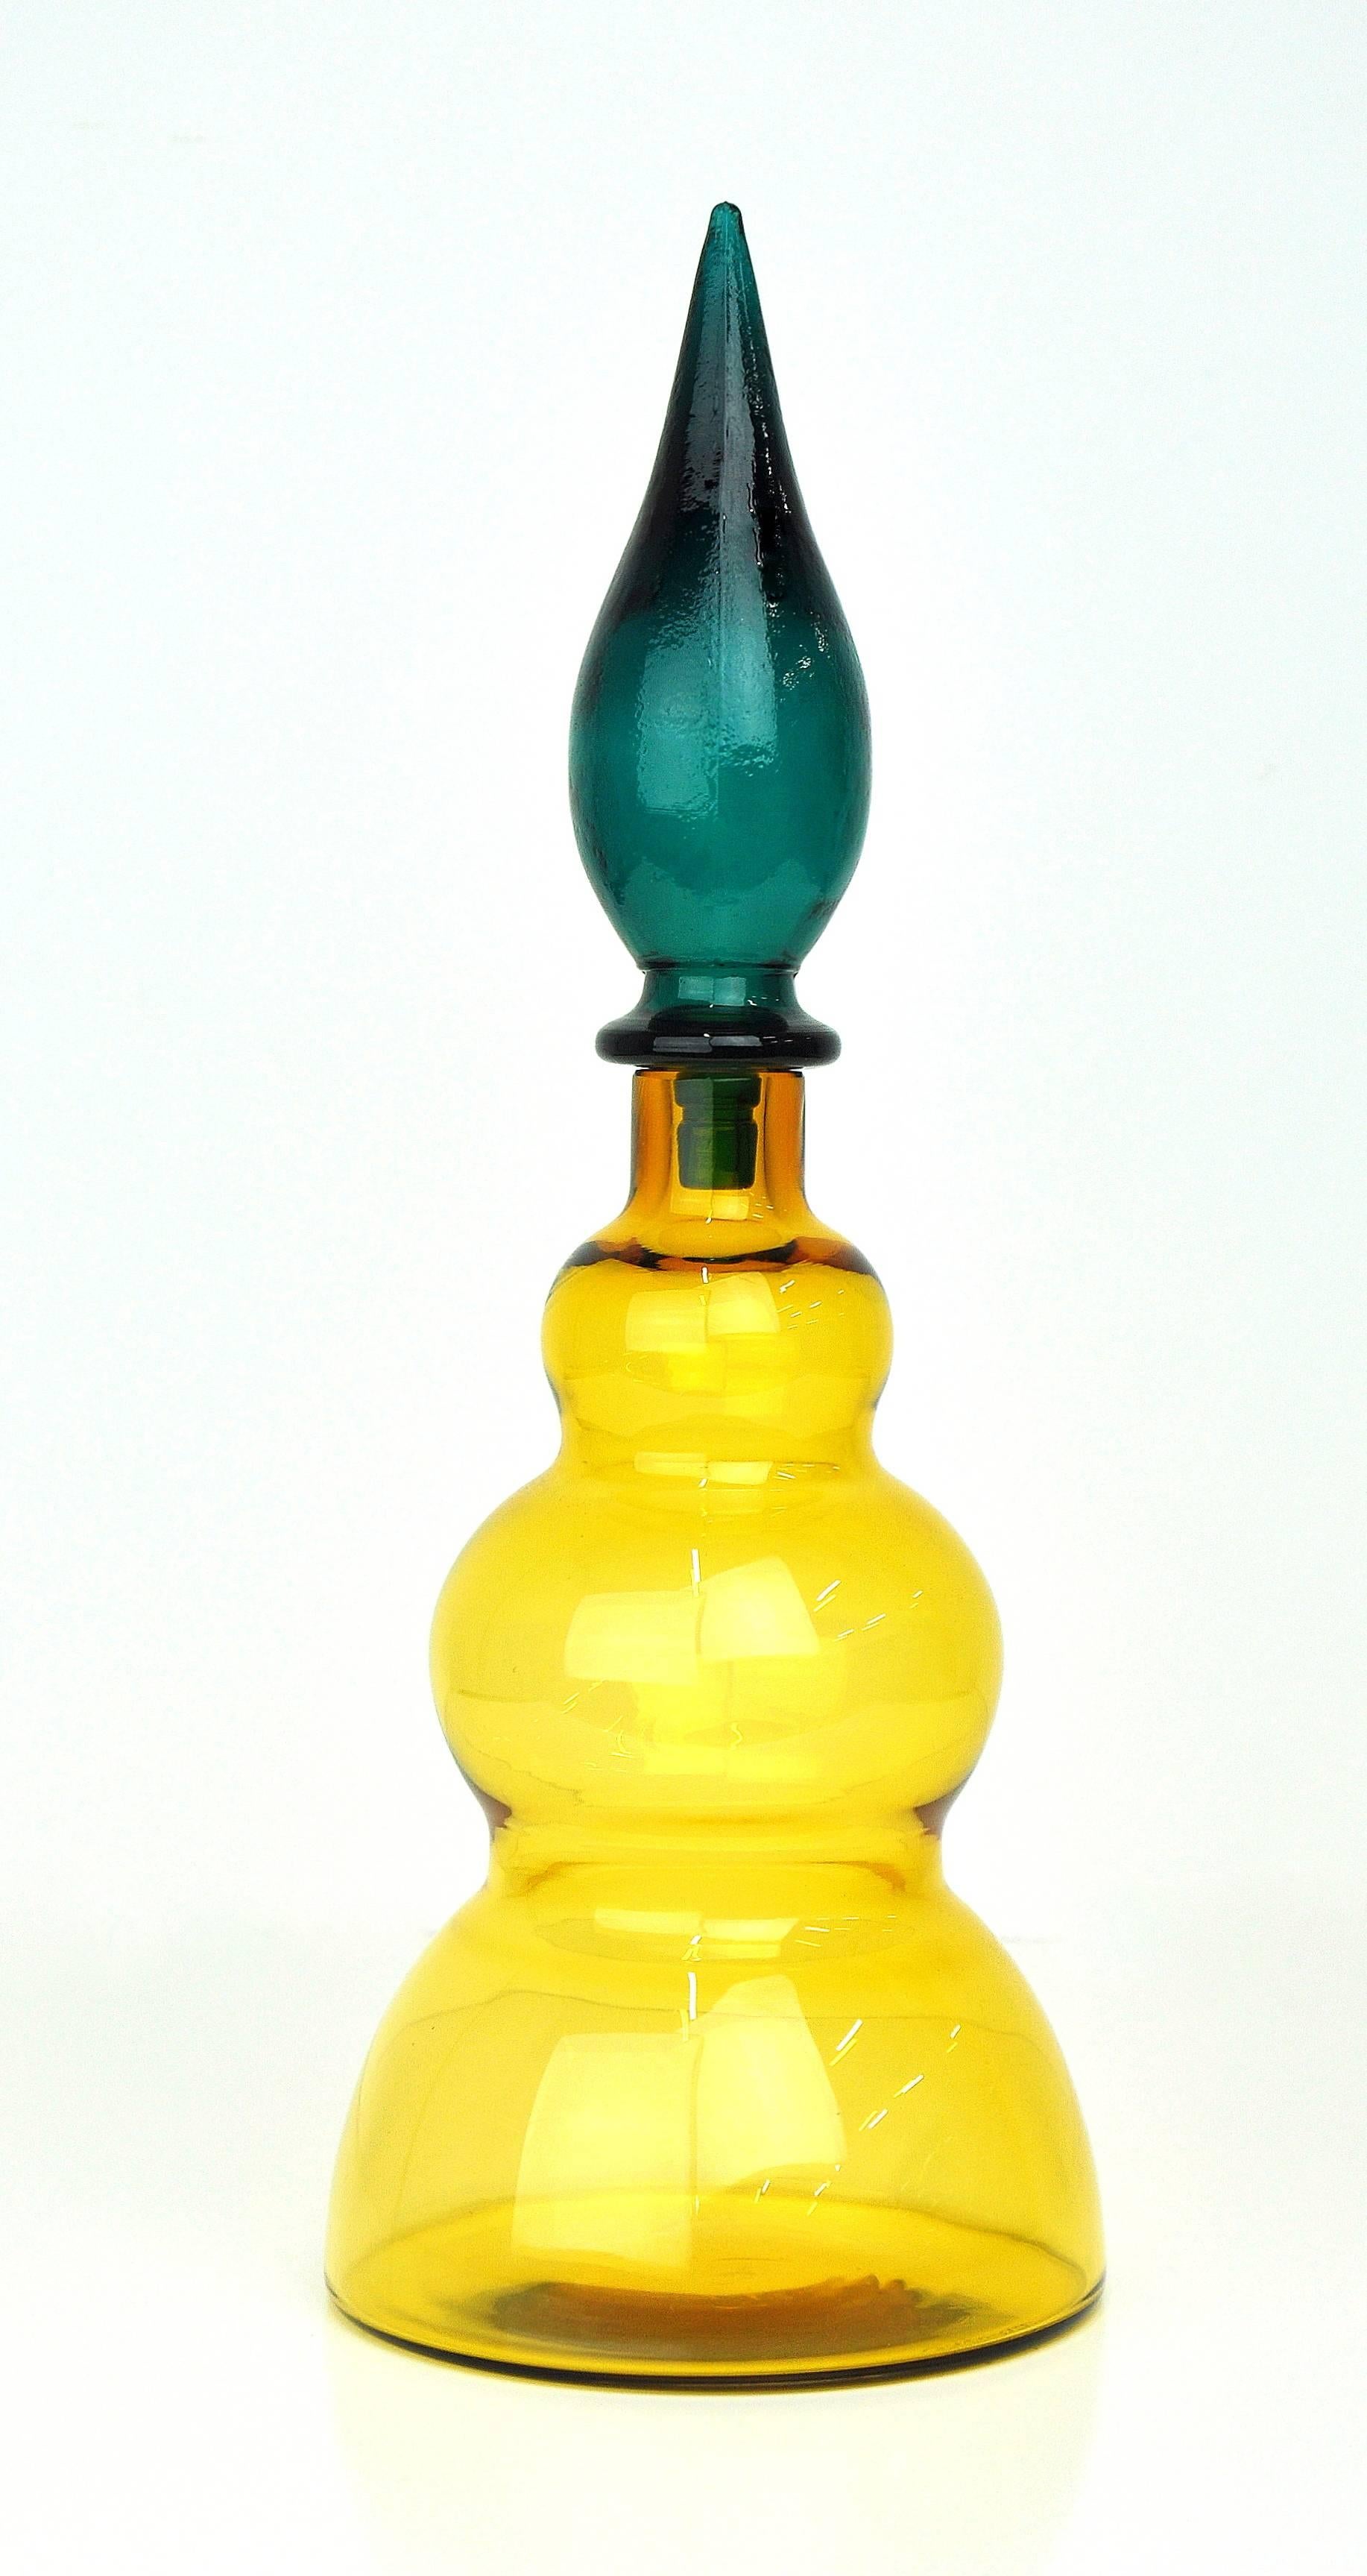 This vintage Italian Mid-Century Modern Venetian gourd shaped art glass genie bottle features a clear amber yellow color and a rich and mesmerizing emerald green colored associated stopper. Manufactured by Salviati, the bottle dates from the 1960s.